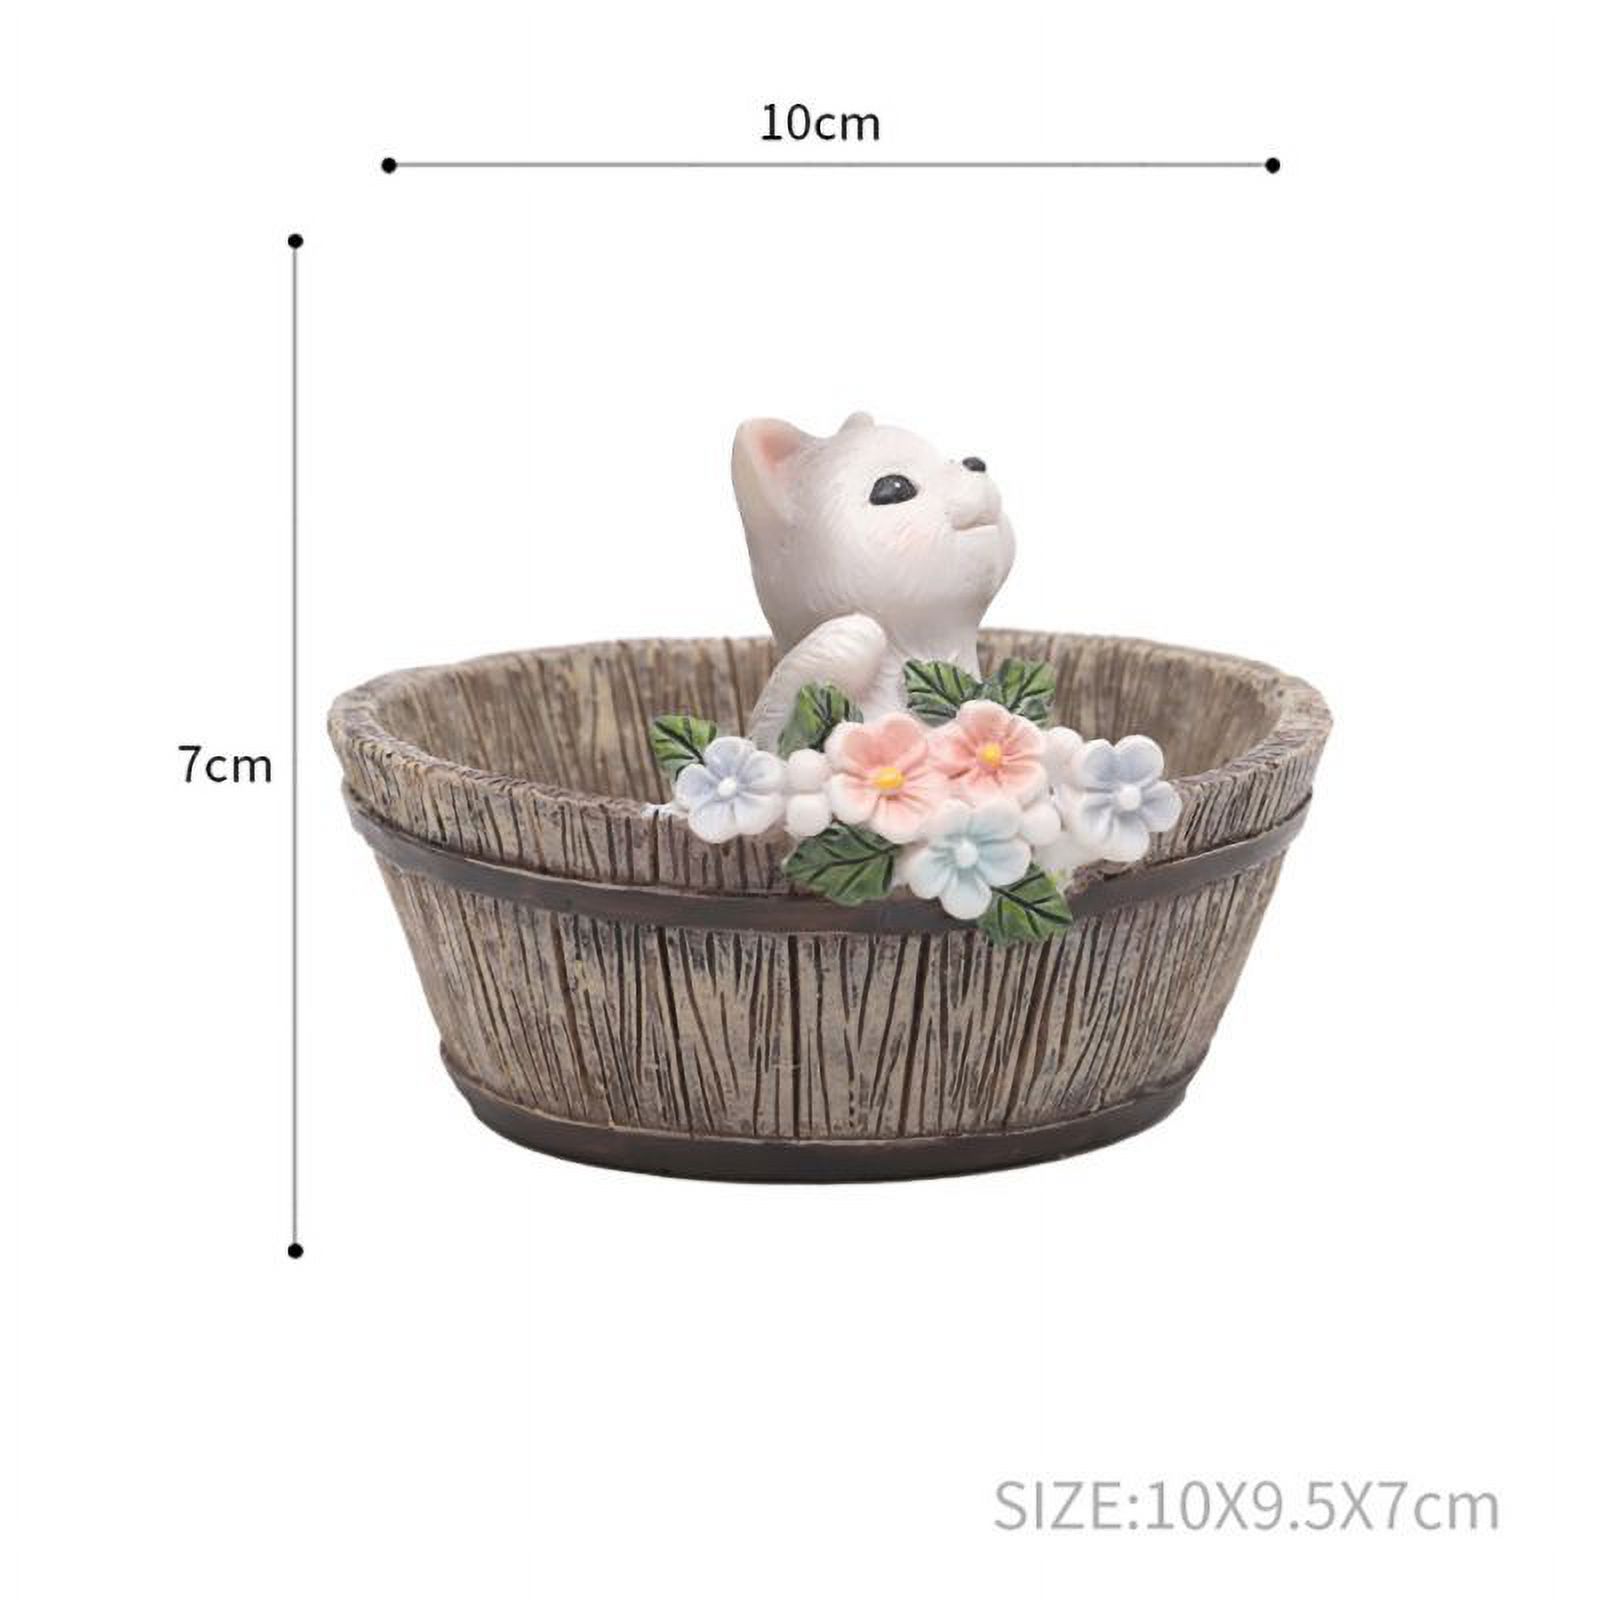 Cute Animal Meaty Flower Pot American Country Style Succulent Pots Resin Mini Flower Pots Fashion Flower Pots Planters - image 2 of 2